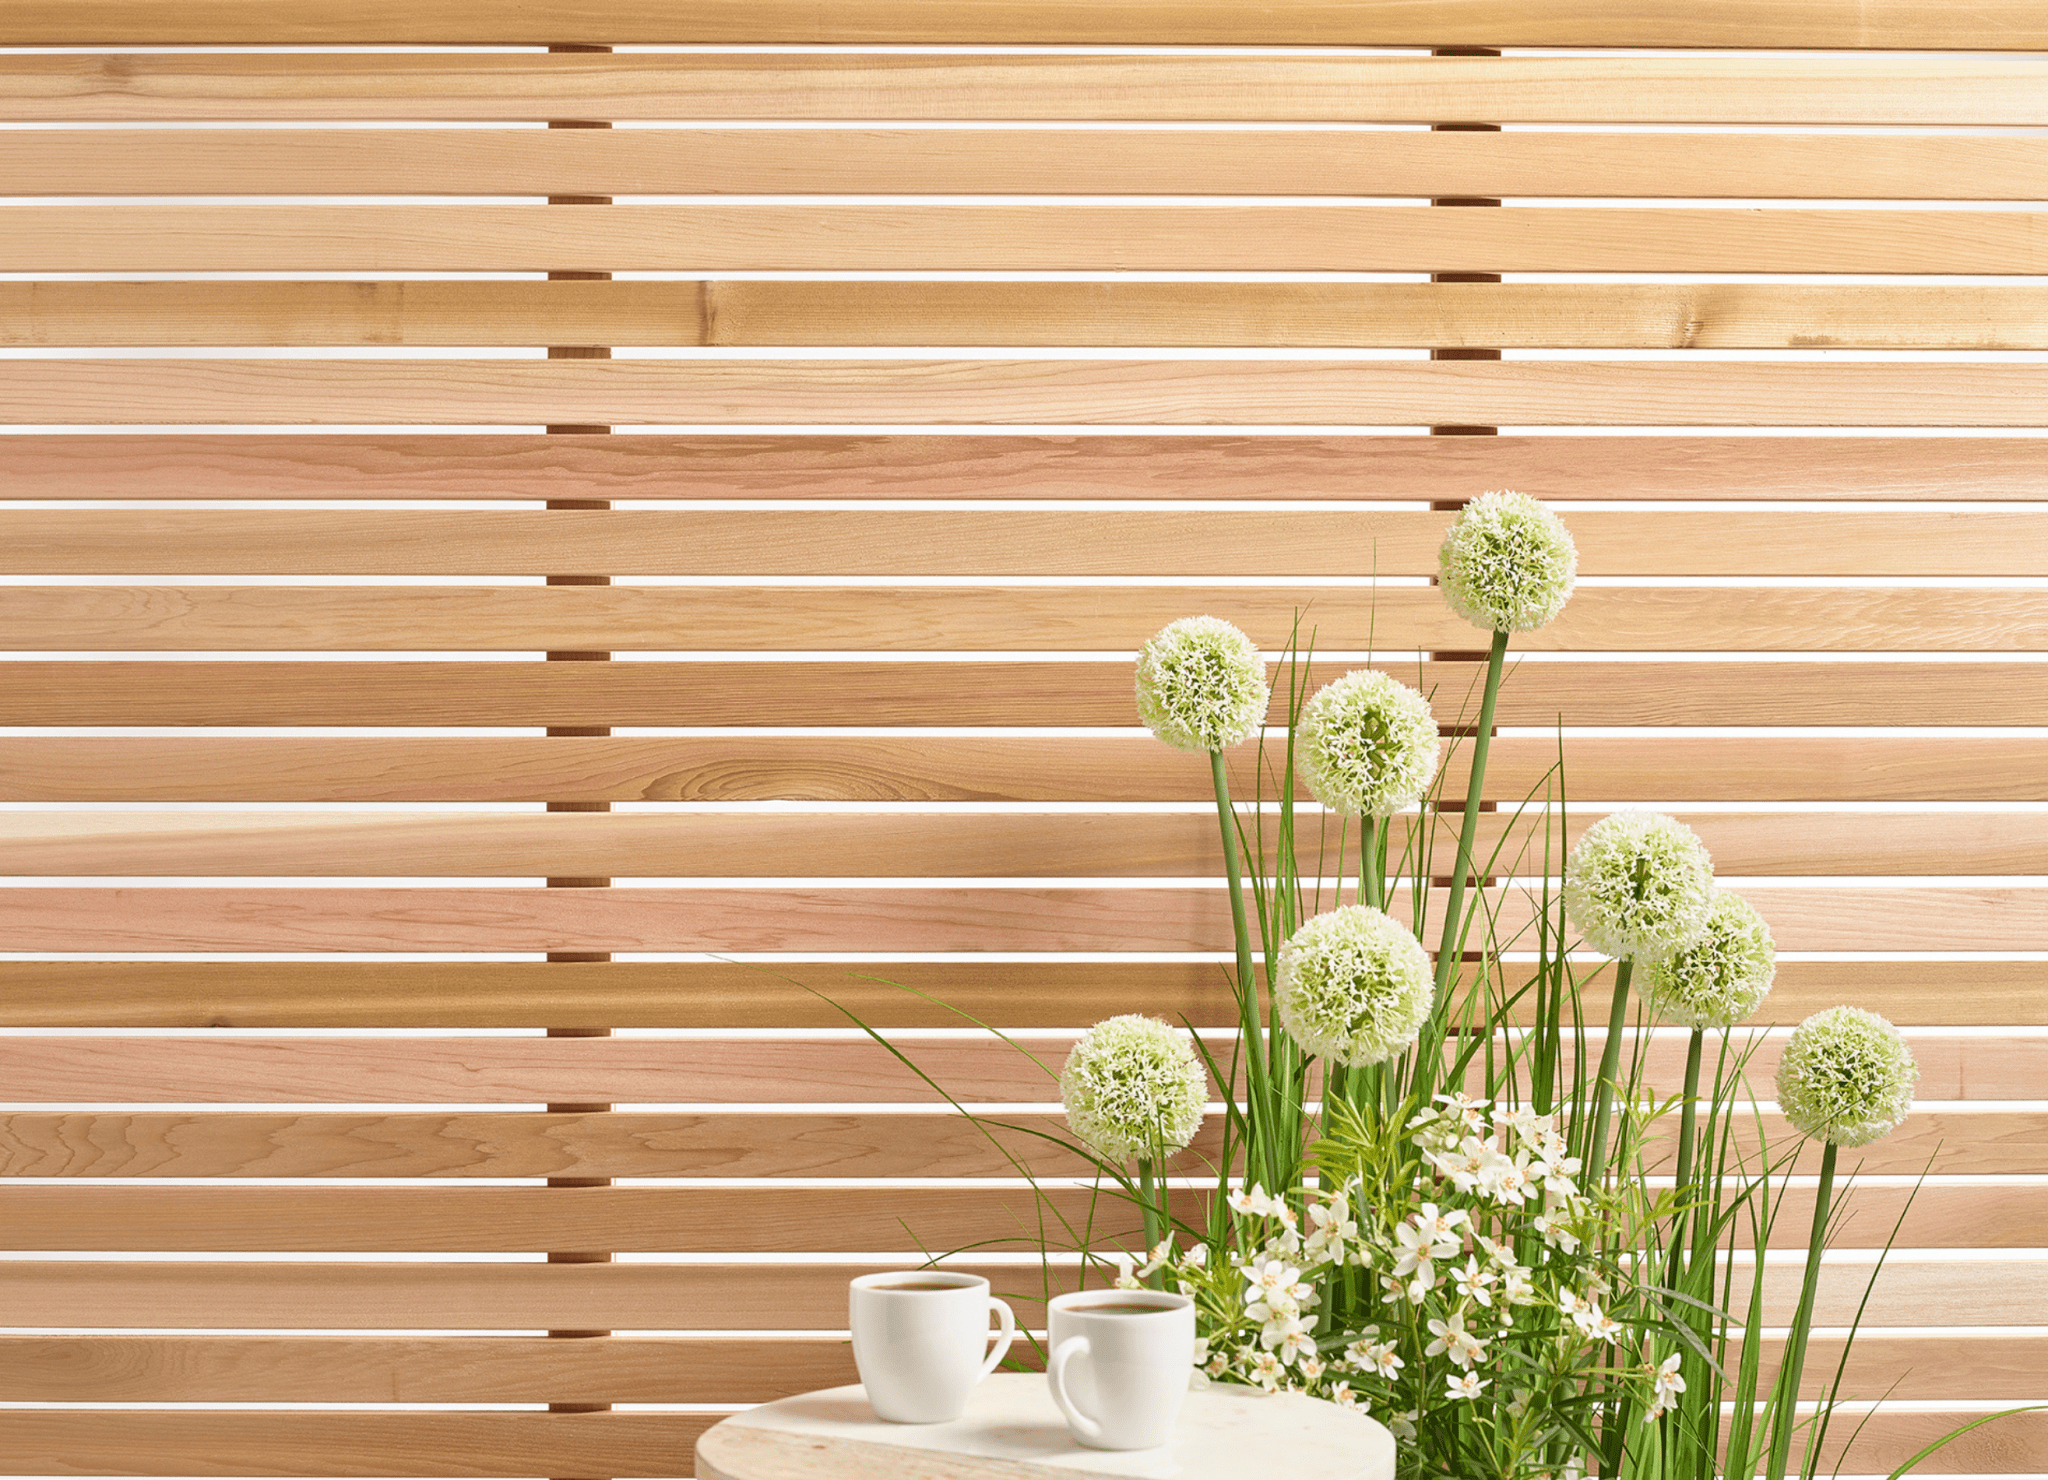 Cedar wood outdoor panels behind green and white flowers next to a table with two coffee cups.